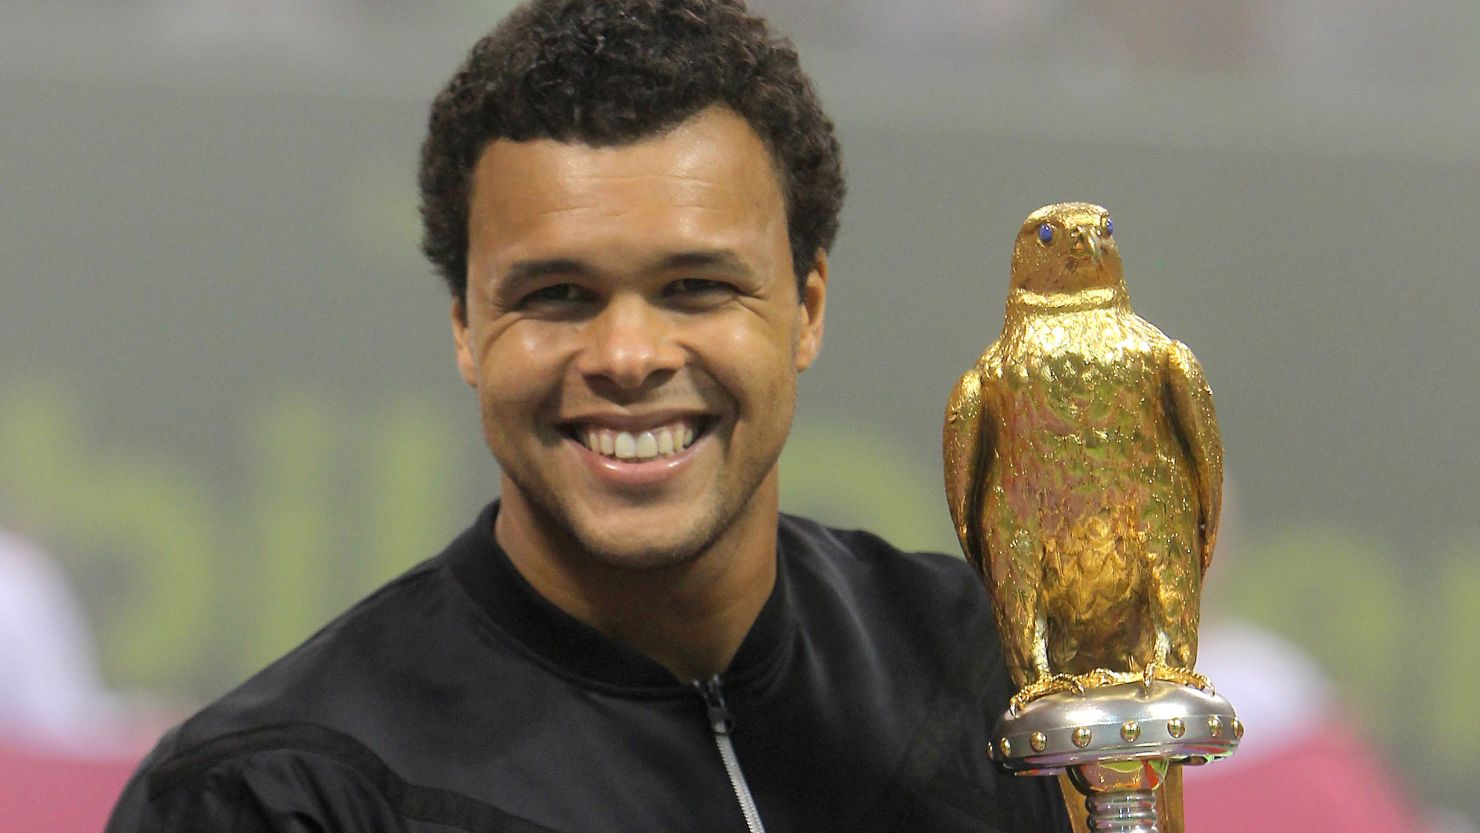 French tennis star Jo-Wilfried Tsonga was all smiles after winning his eighth ATP Tour title in Doha on Saturday.